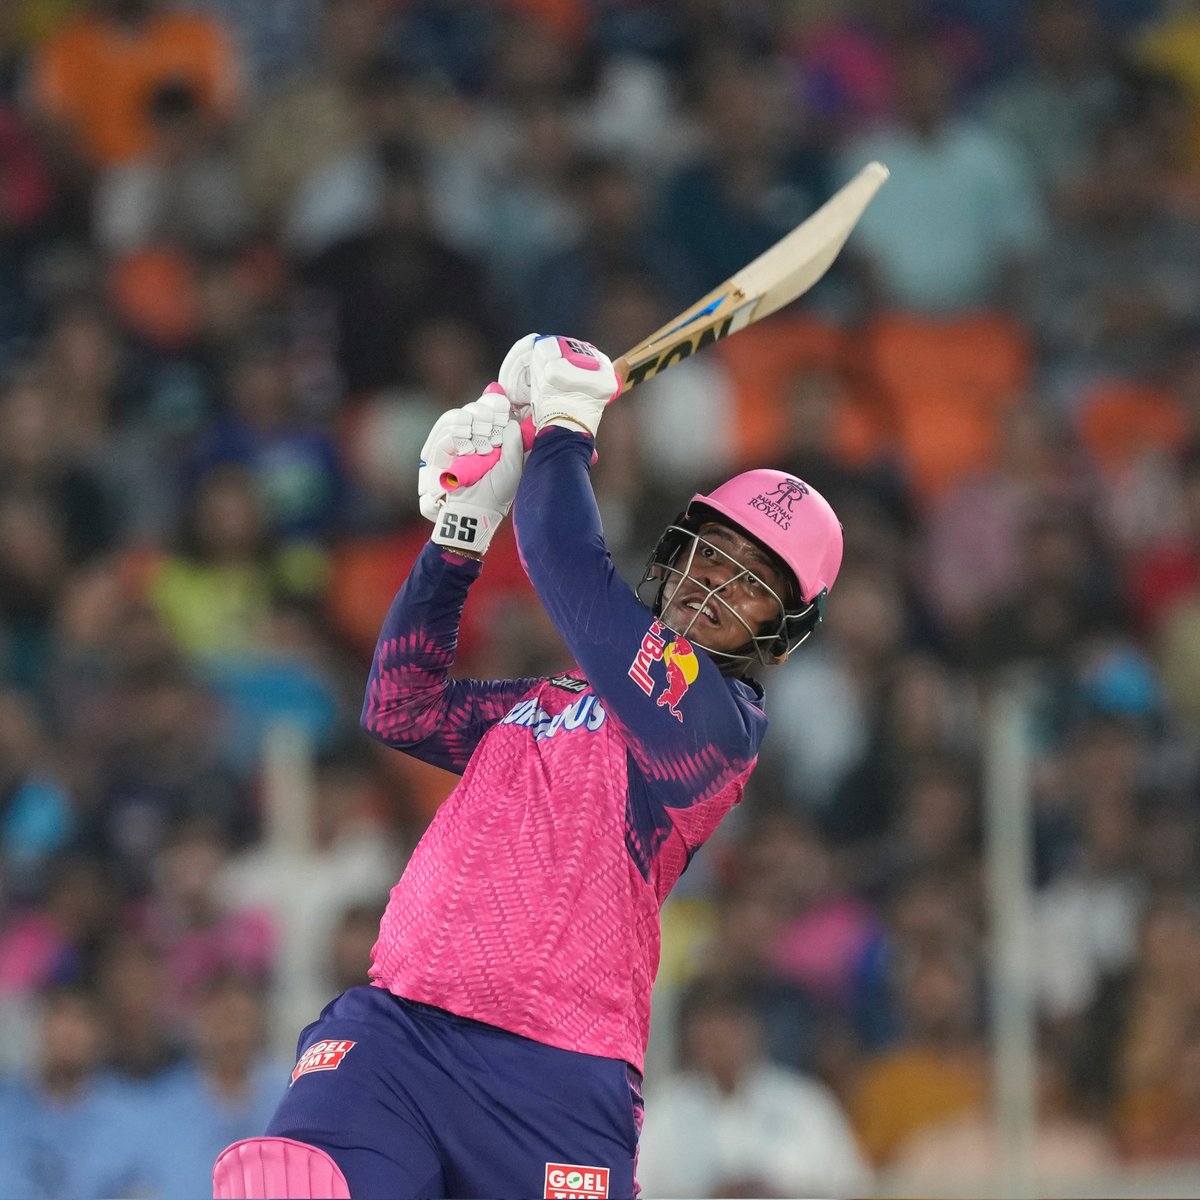 Sanju Samson created the foundation and then brilliantly finished by Shimron Hetmyer the combination of two outstanding knocks well played 👏💯🔥

#GTvRR #SanjuSamson #ShimronHetmyer #RajasthanRoyals